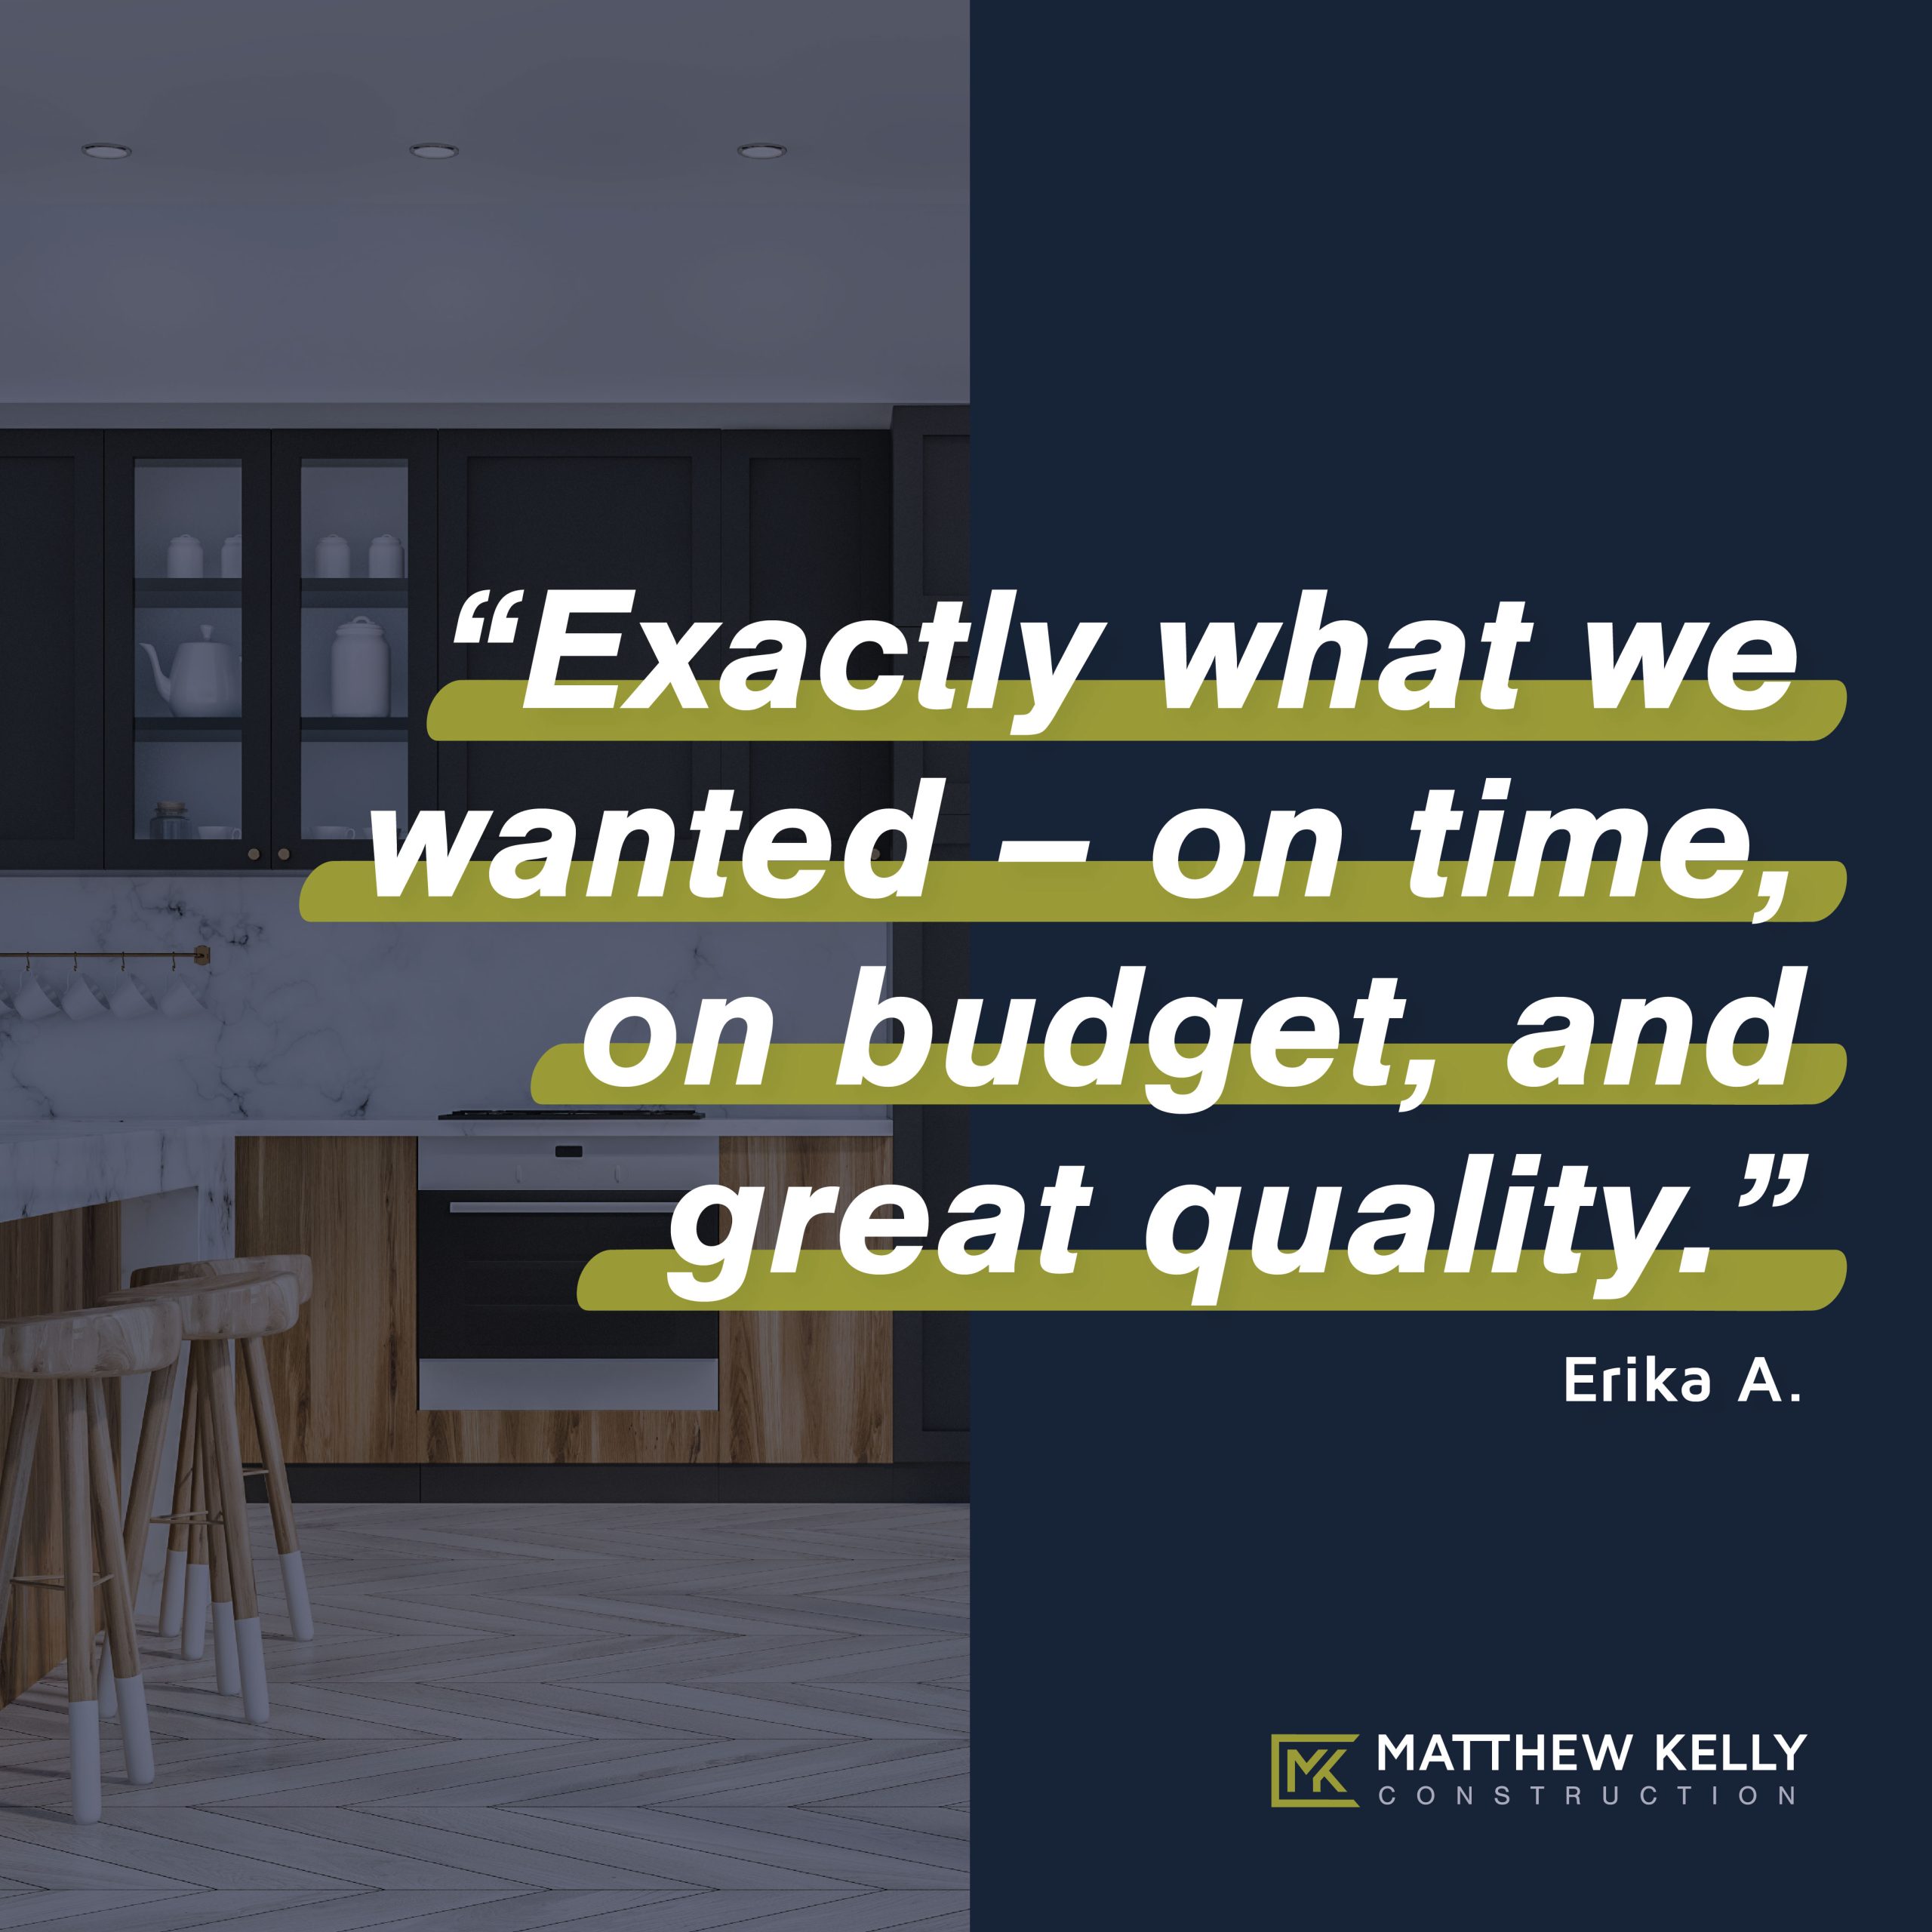 Customer review for Matthew Kelly Construction.